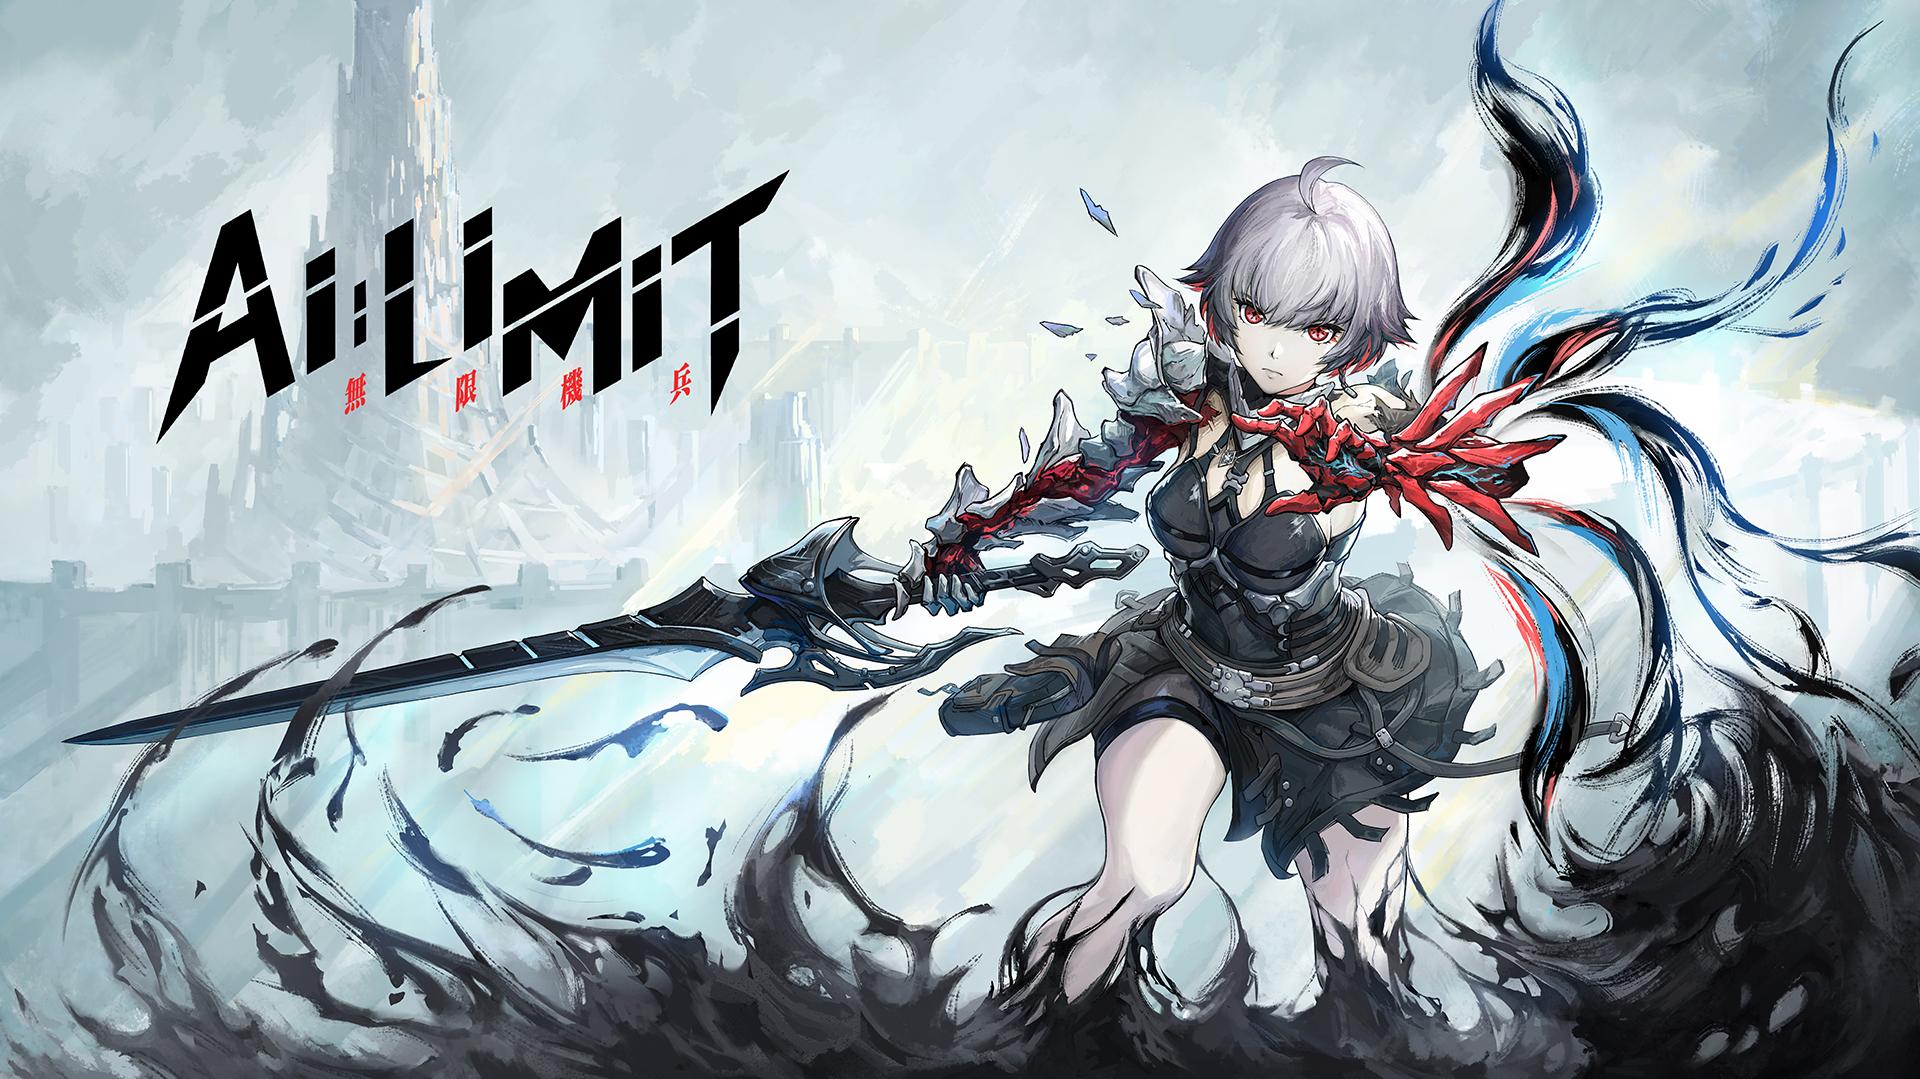 Post Apocalyptic Sci Fi Action Rpg Ai Limit Will Launch For Pc And